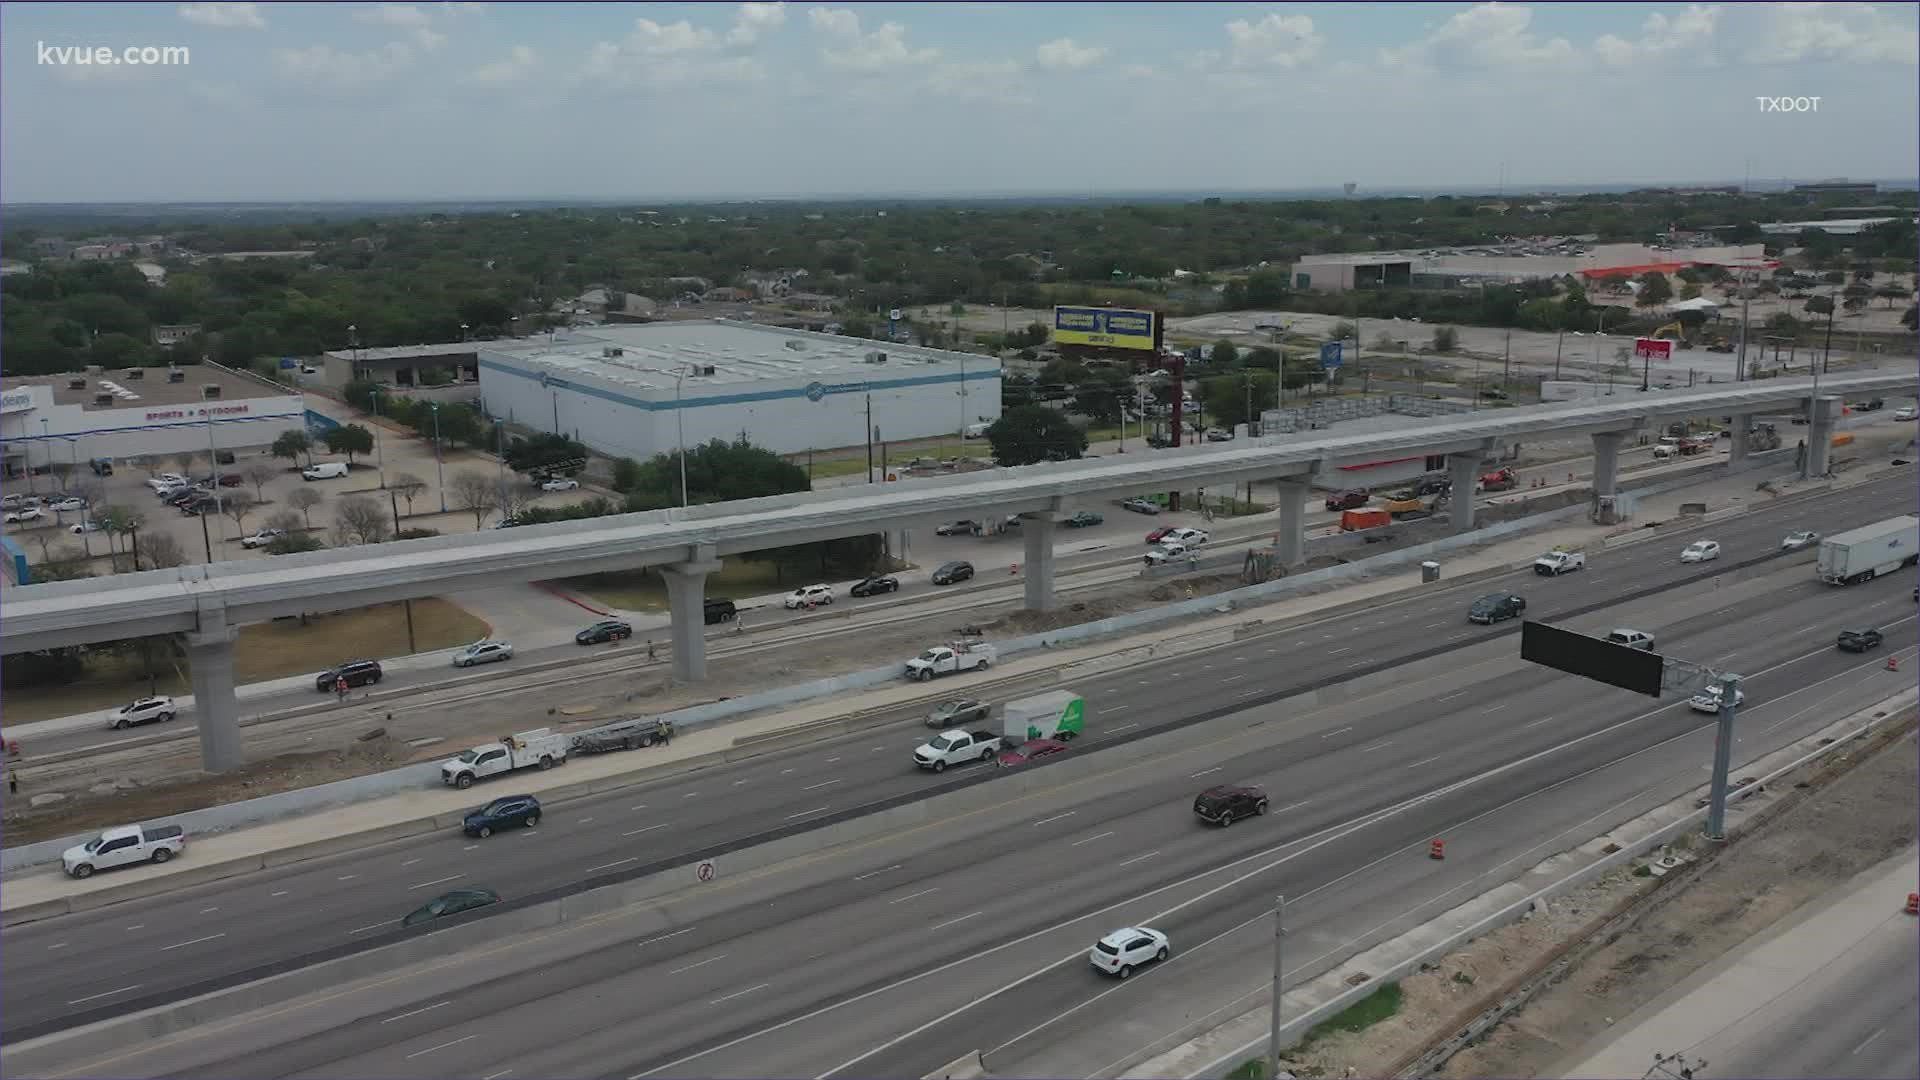 Main lanes on northbound I-35 will be closed Friday night for restriping.